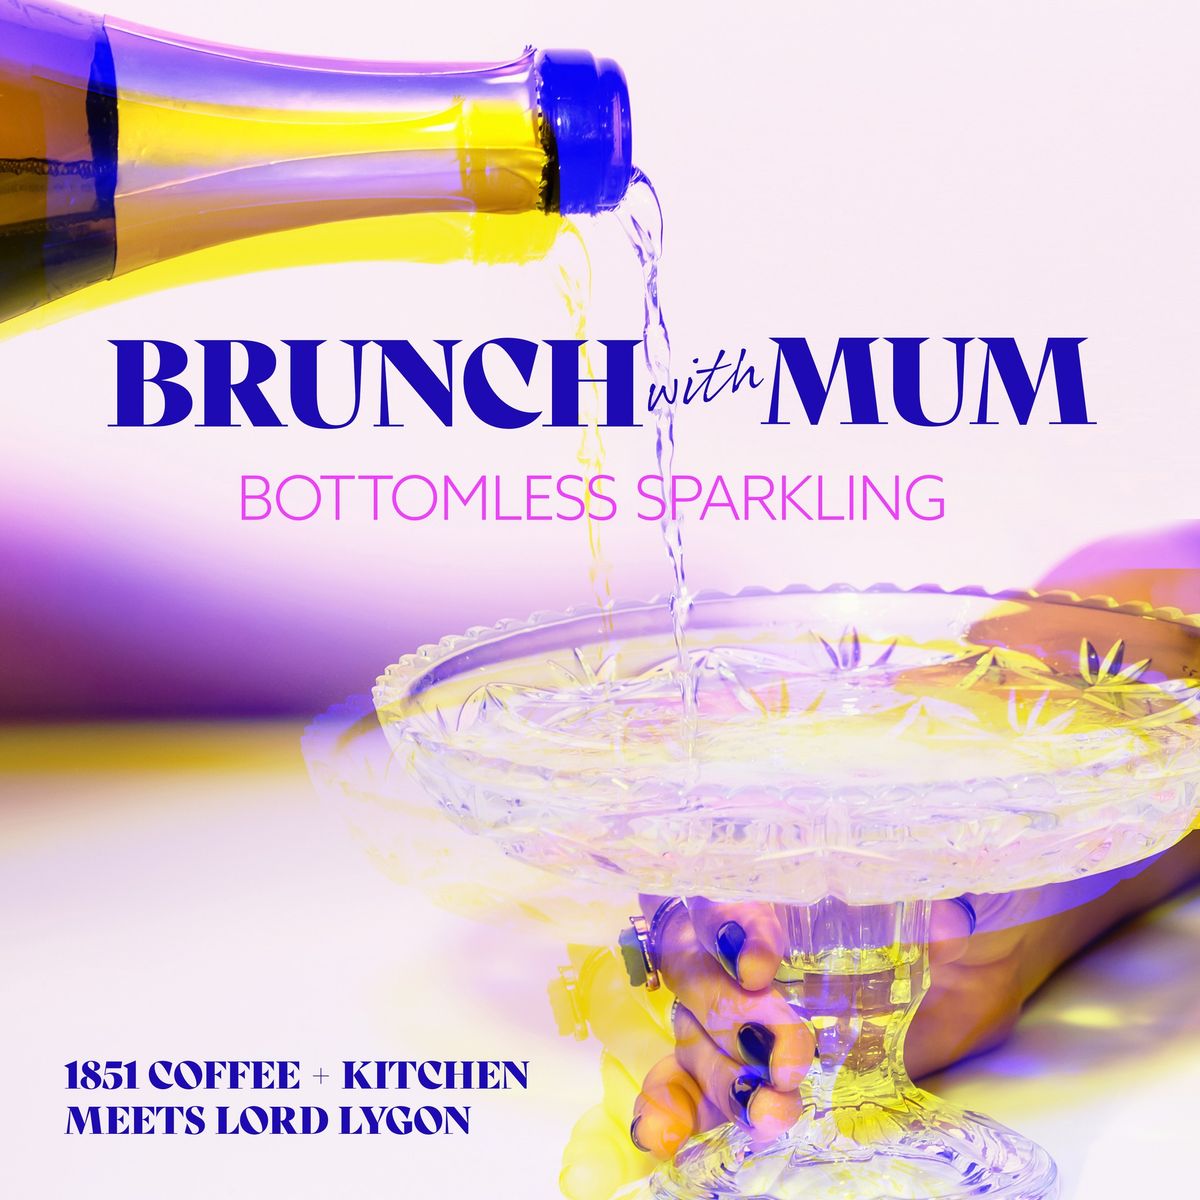 Bottomless Brunch With Mum - $40 per person 